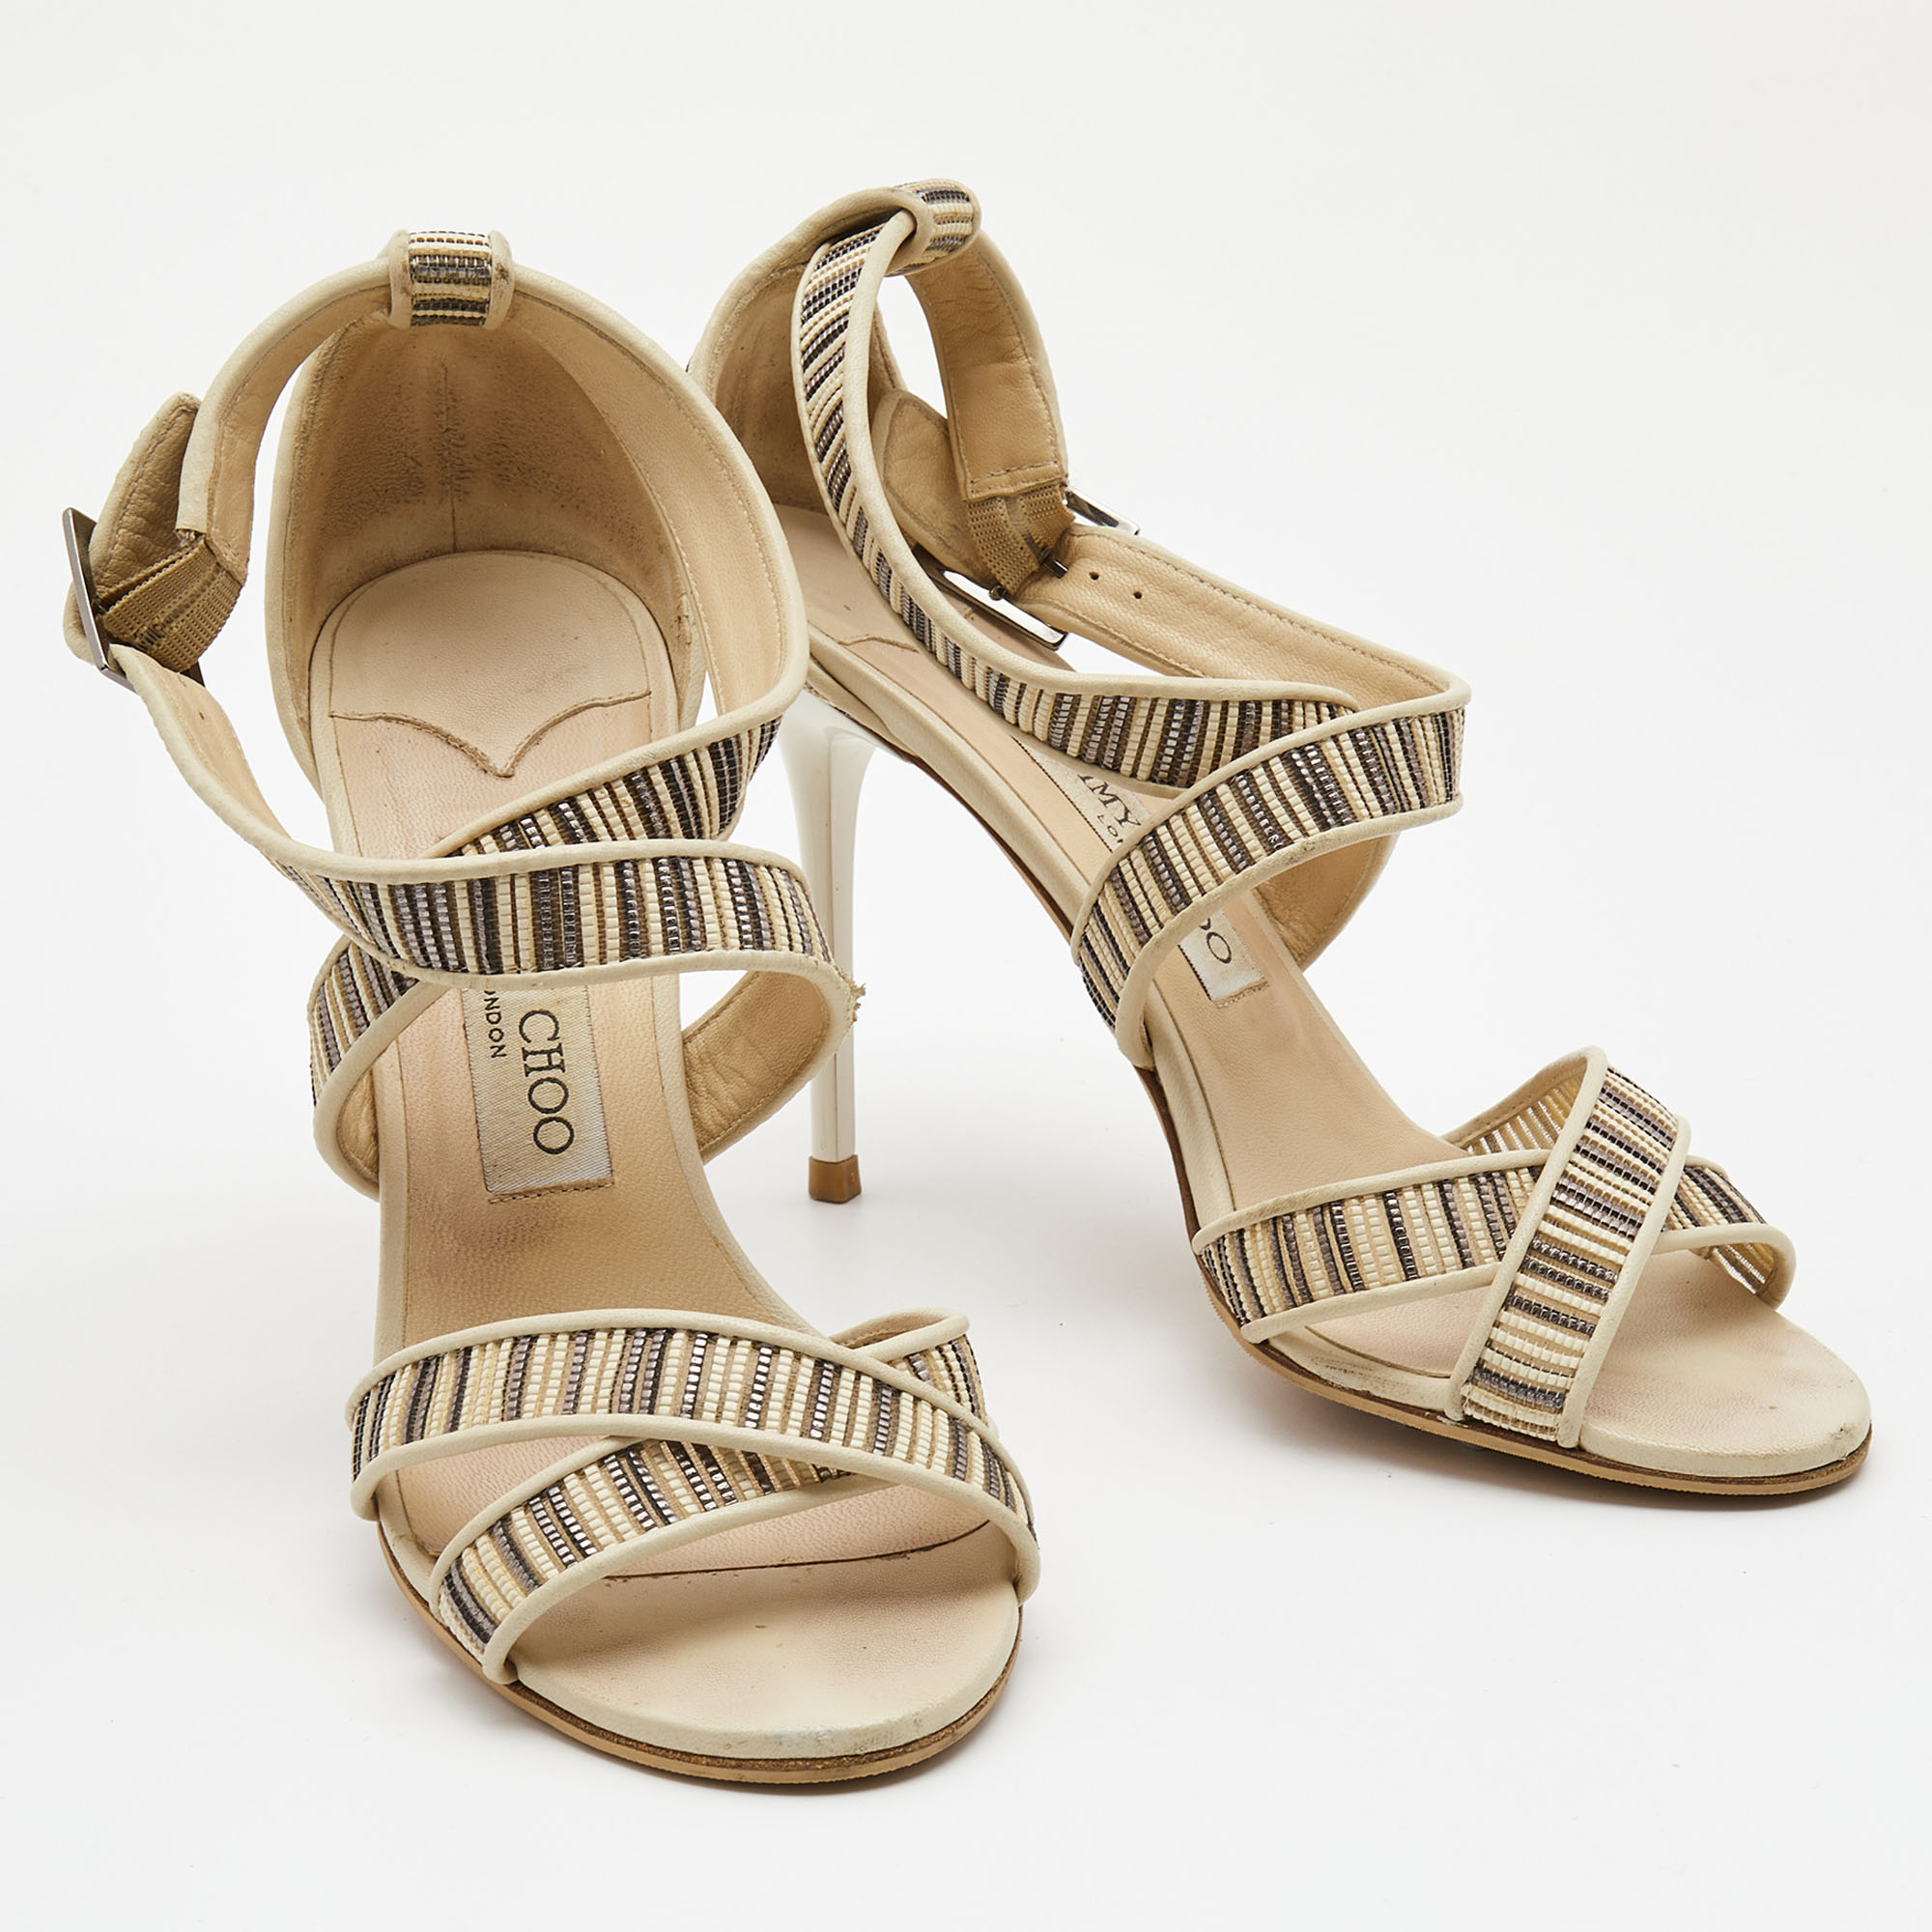 Jimmy Choo Cream/Black Leather Ankle Strap Sandals Size 38.5